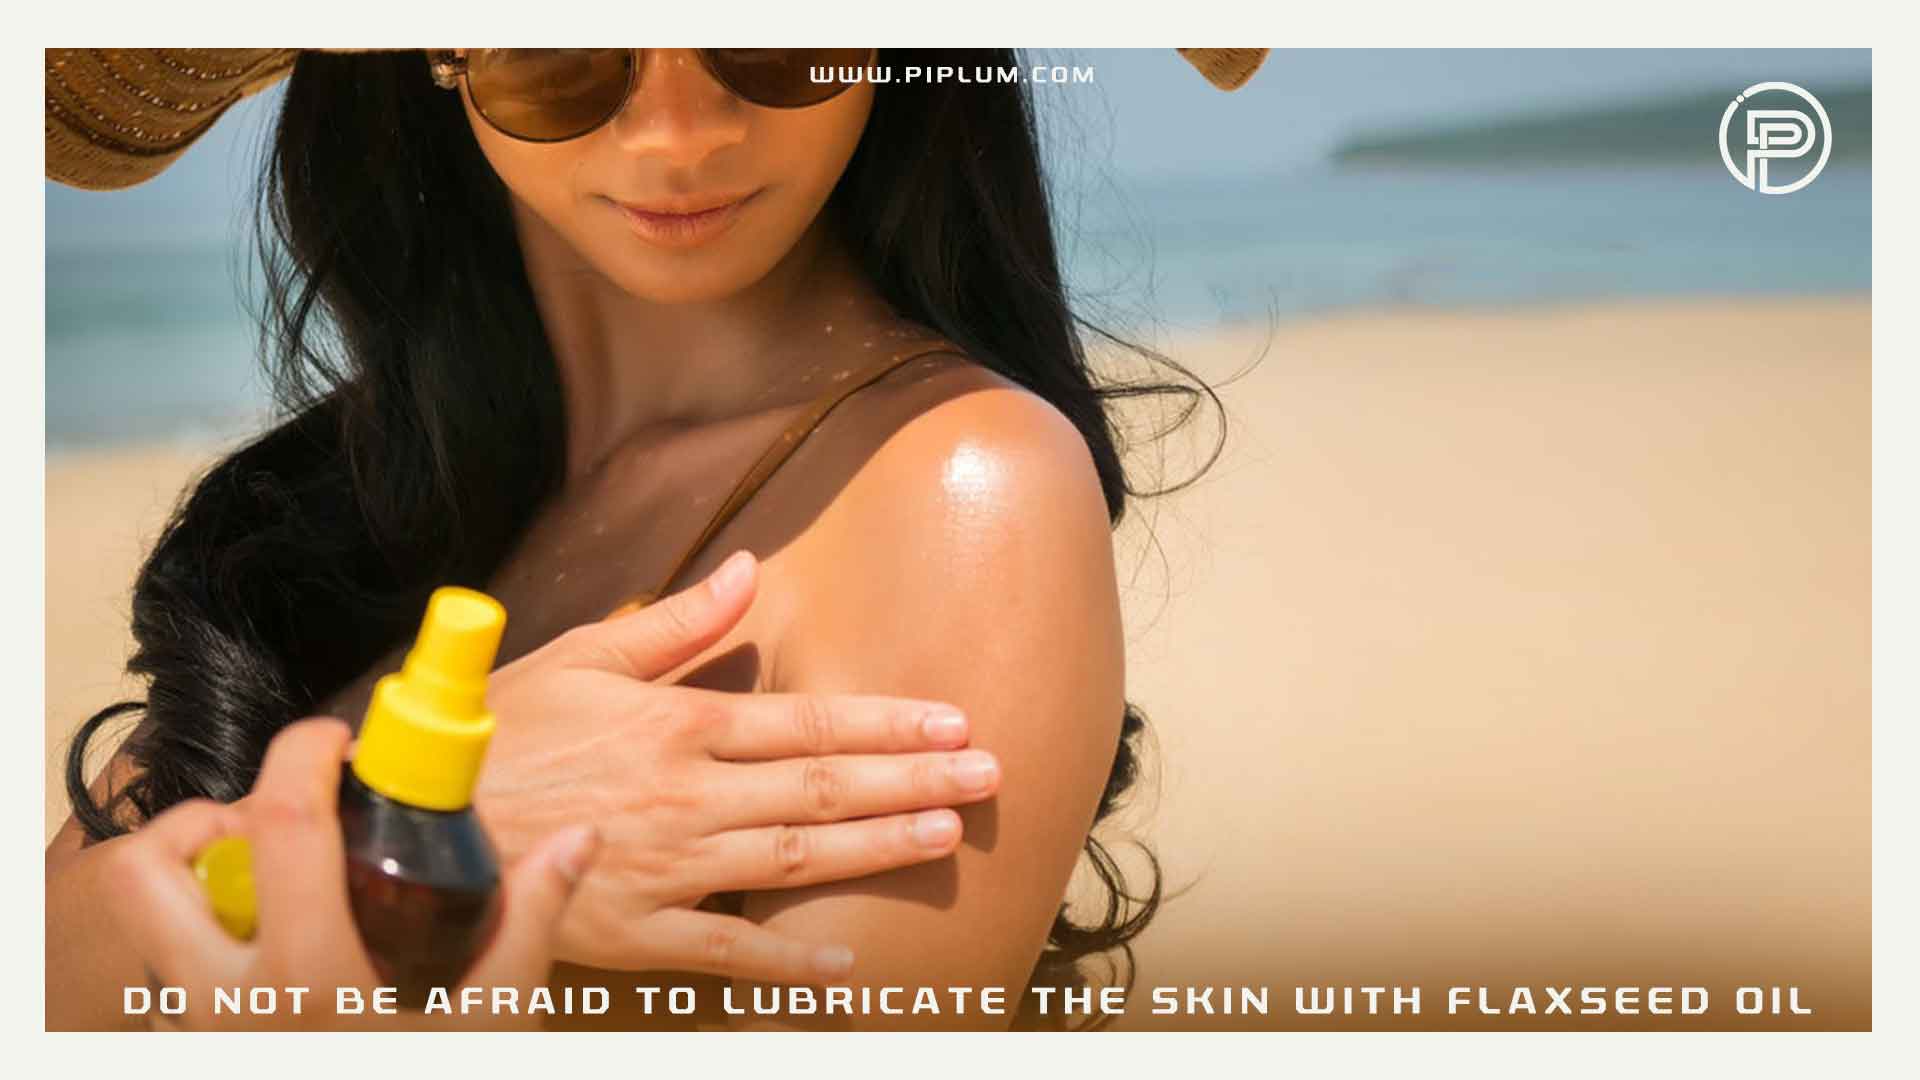 If-you-burn-in-the-sun-do-not-be-afraid-to-lubricate-the-skin-with-flaxseed-oil-it-soothes-removes-redness-and-the-skin-renews-faster